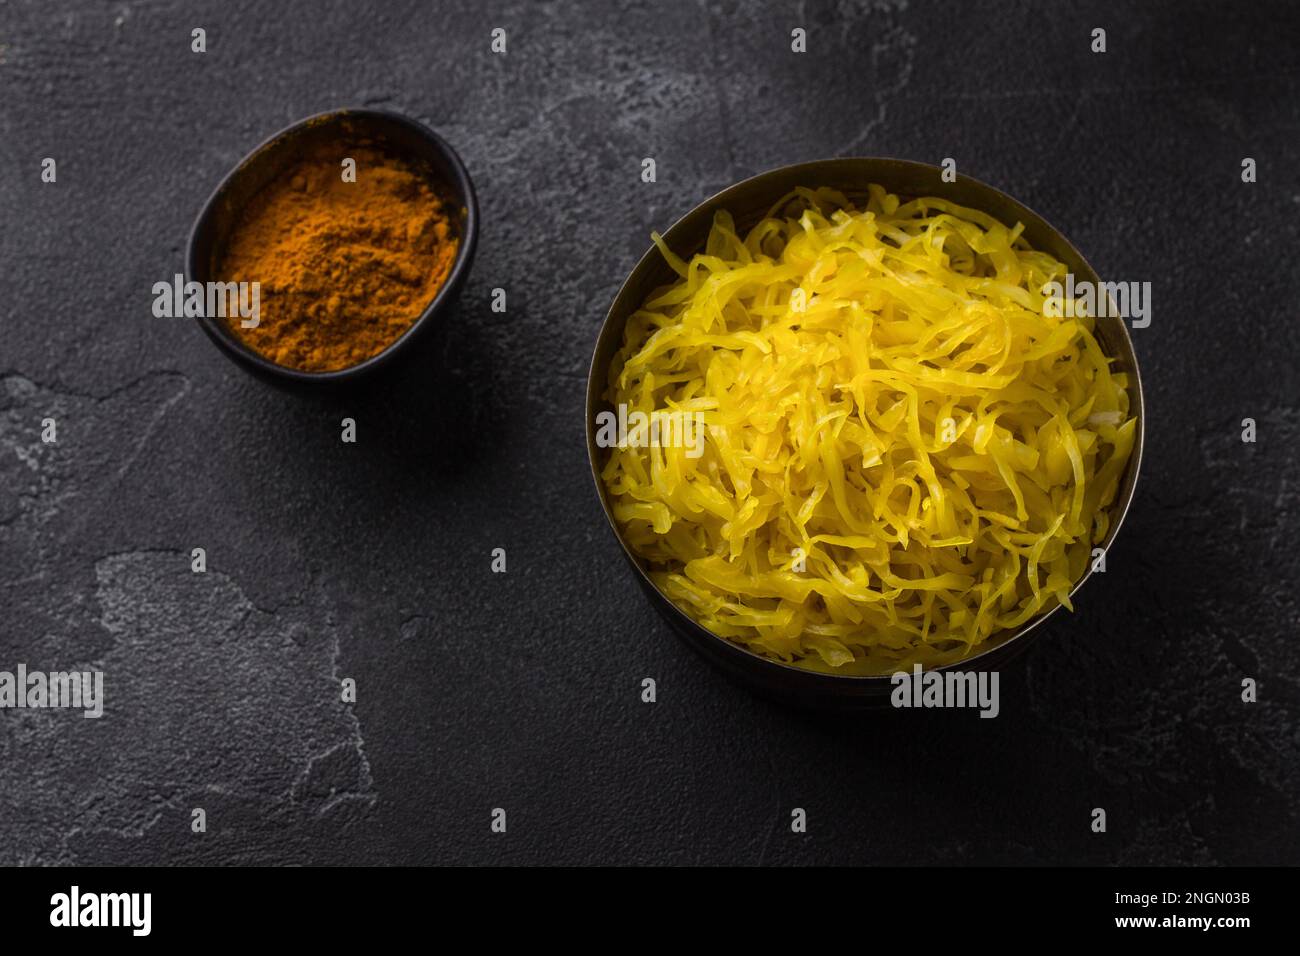 Homemade sauerkraut with garlic, onion and turmeric on a dark textured background. healthy fermented food, natural probiotic, vegan food. top view Stock Photo